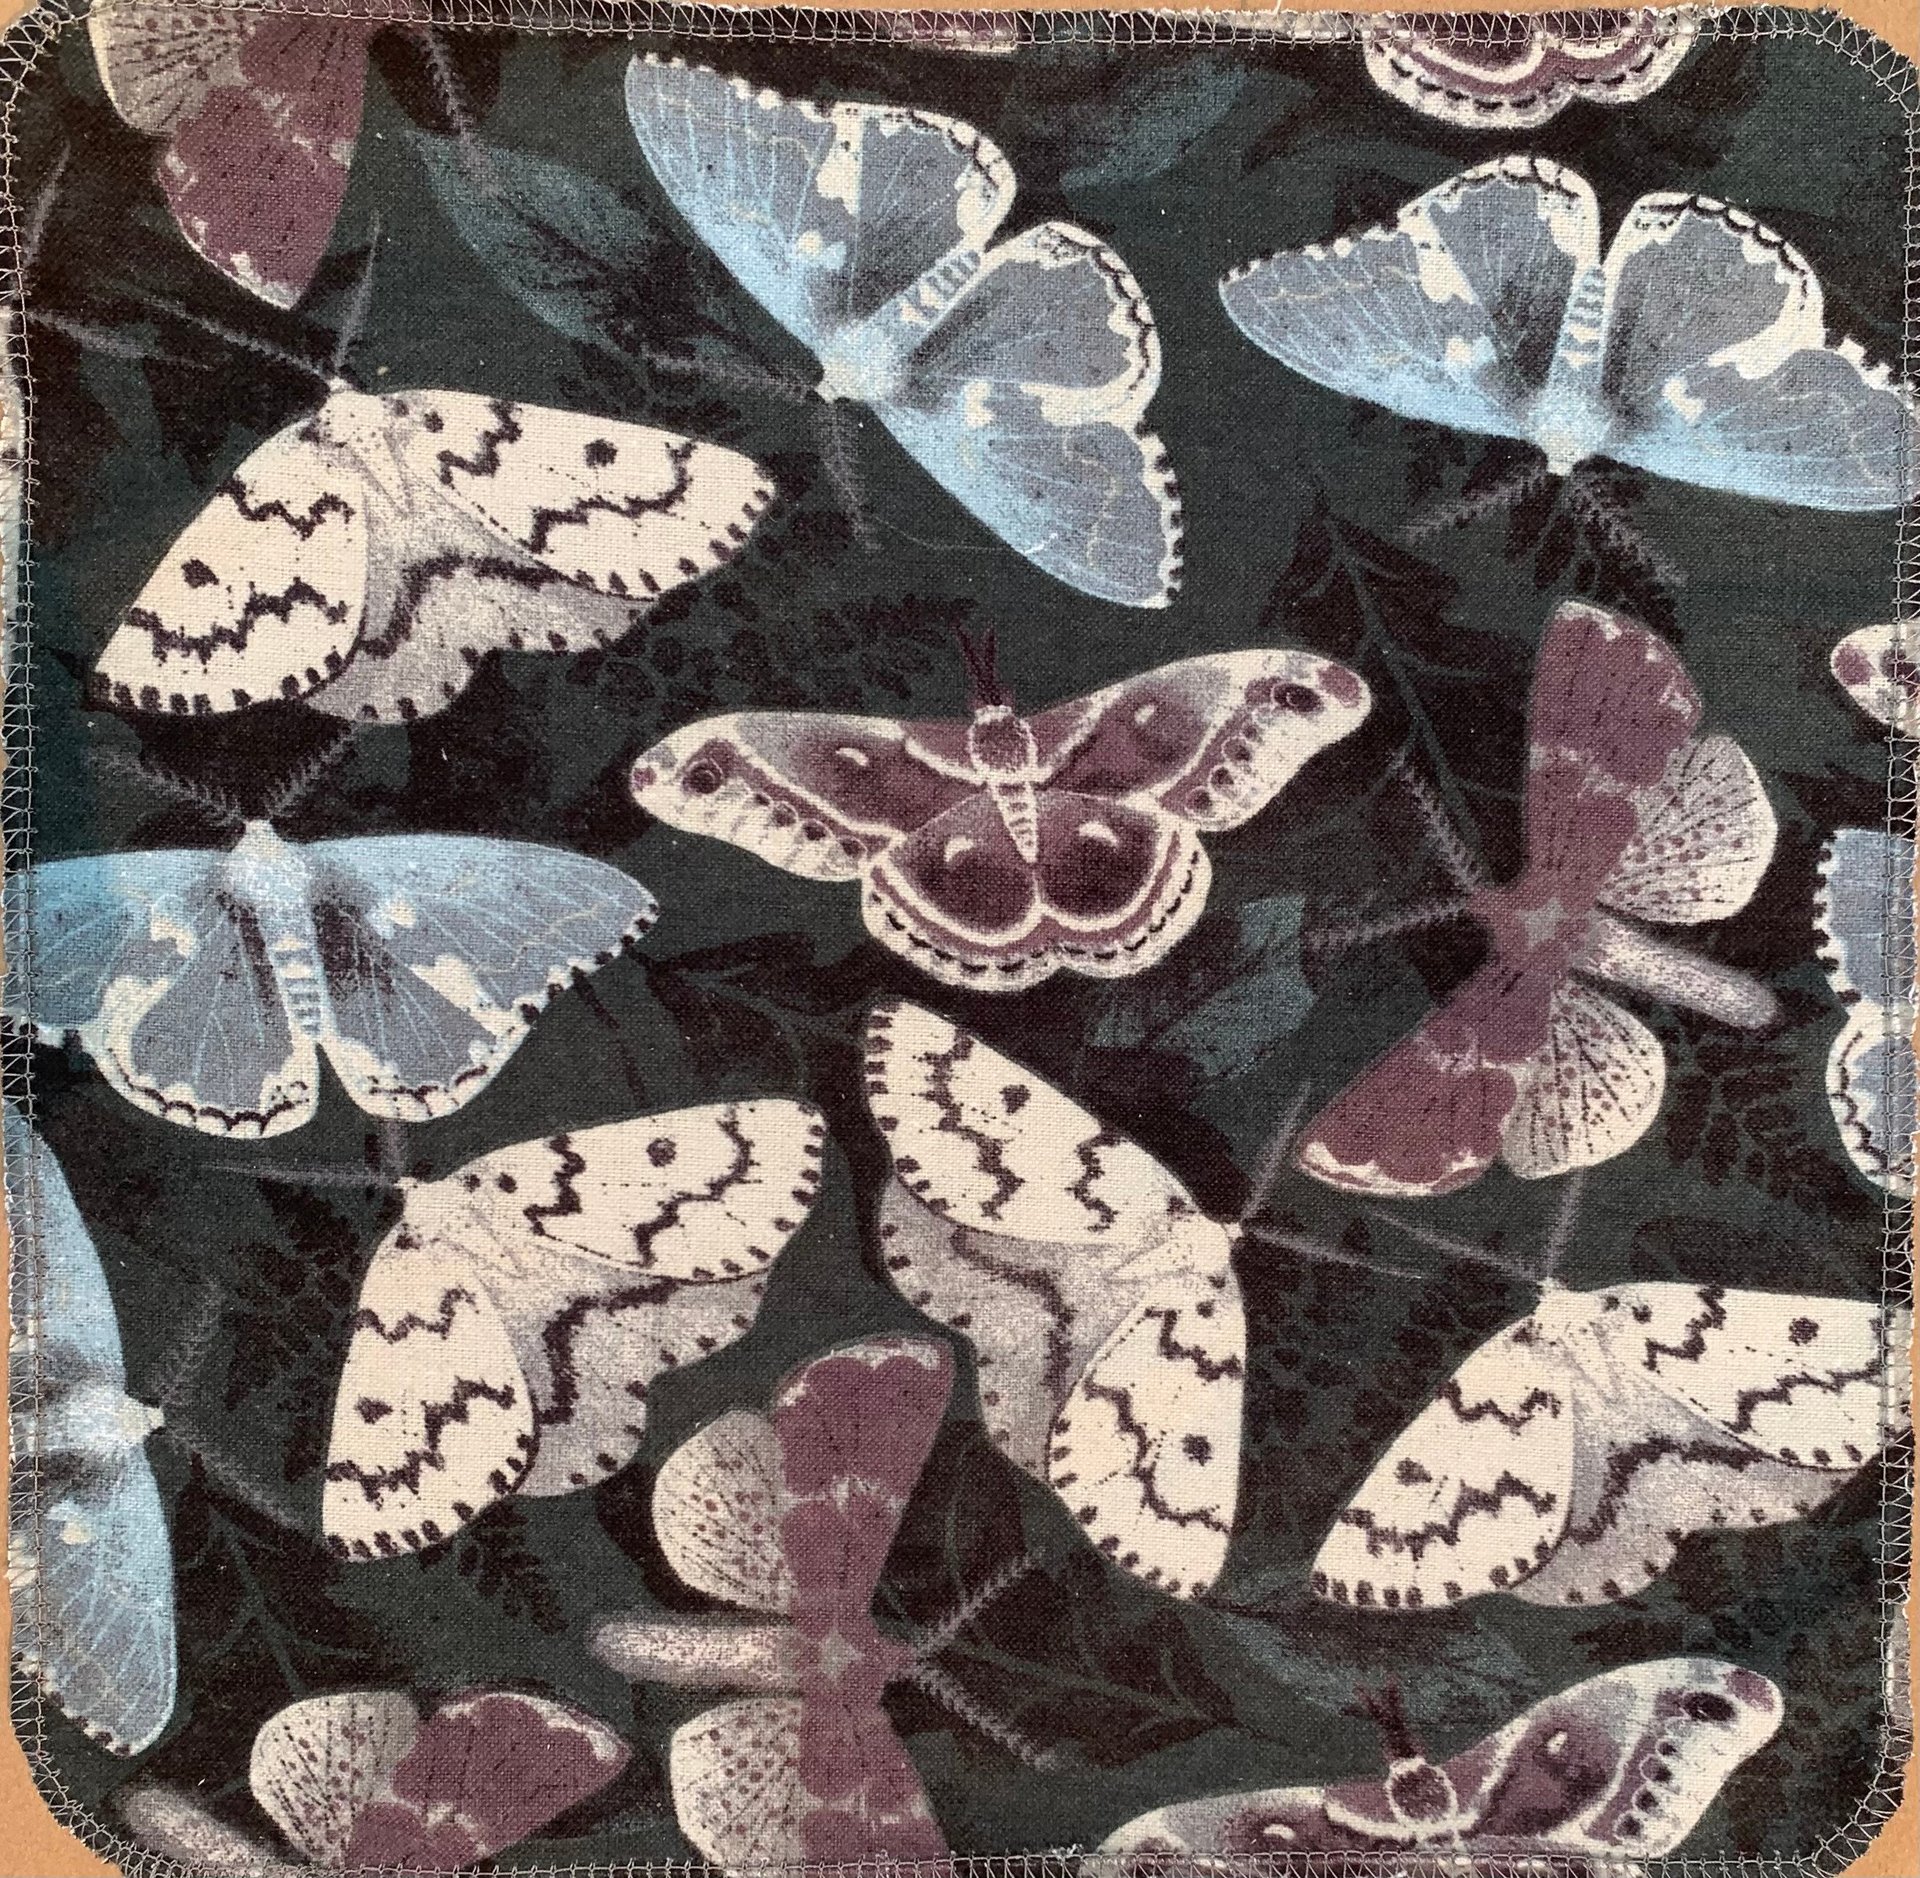 Spooky Butterflies, Moths and Botanicals Paperless Towels || Unpaper Towels || Eco Sustainable Kitchen